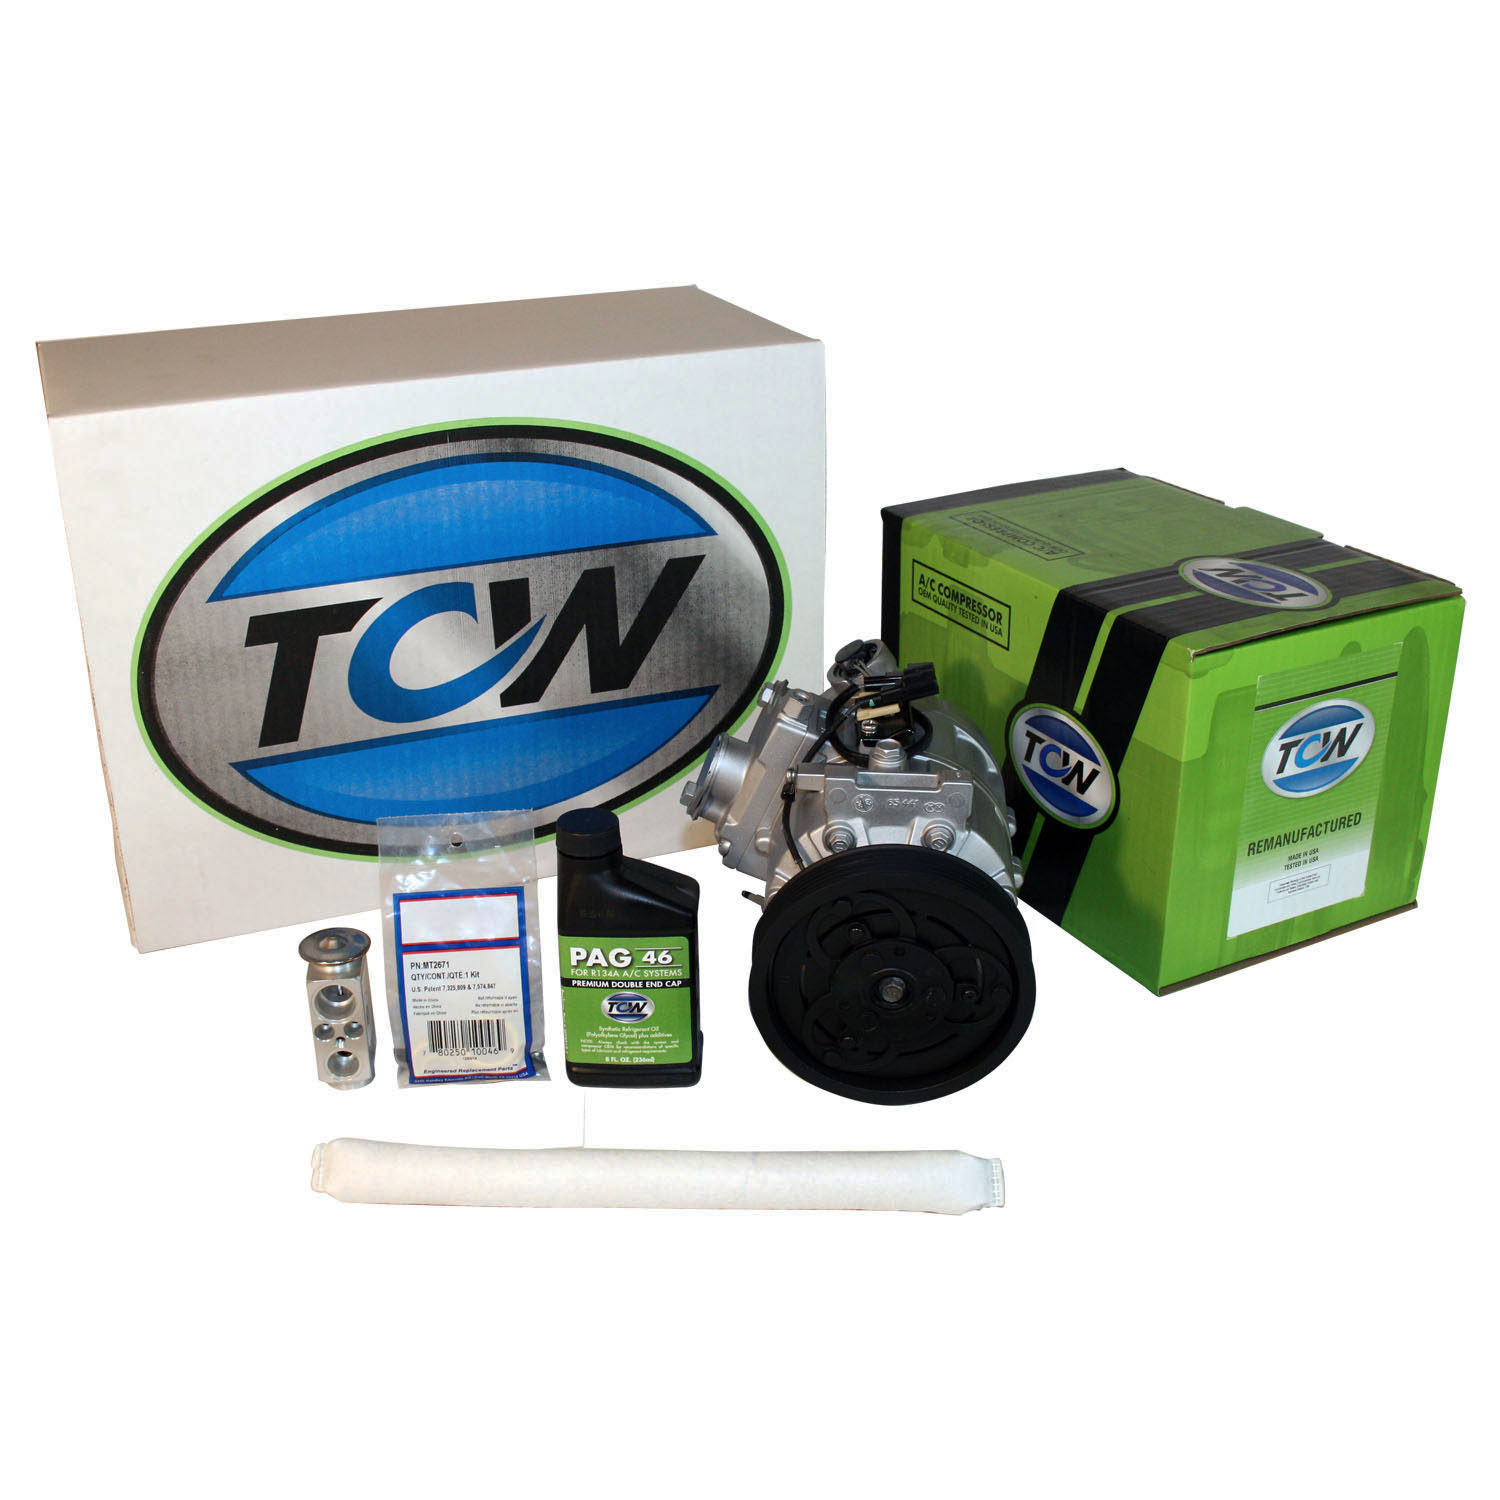 TCW Vehicle A/C Kit K1000480R Remanufactured